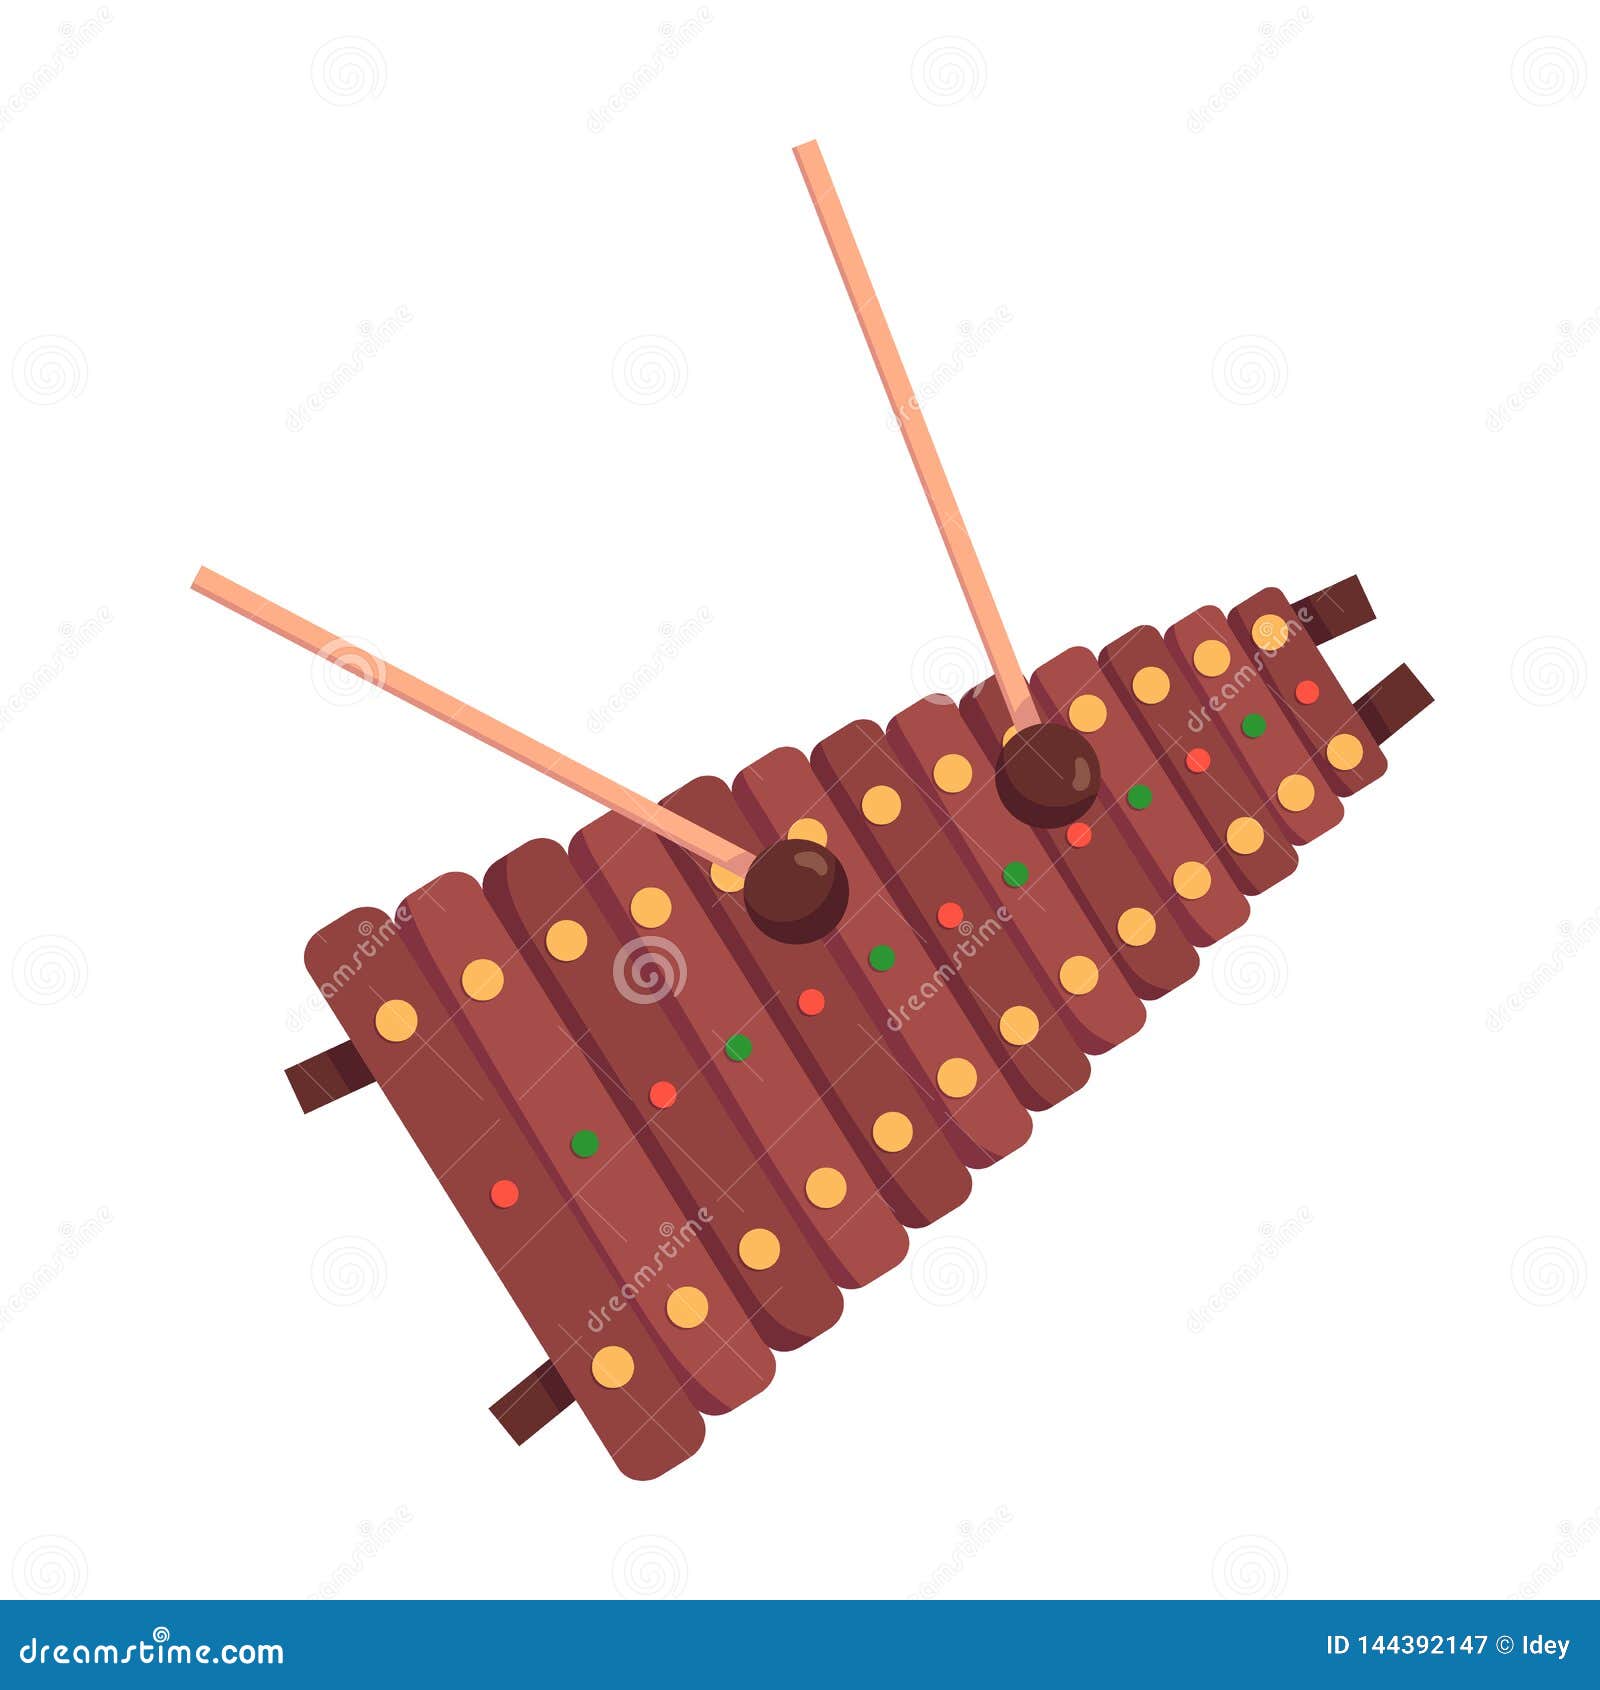 voiced percussion musical instrument xylophone, with wooden keys, percussion sticks.